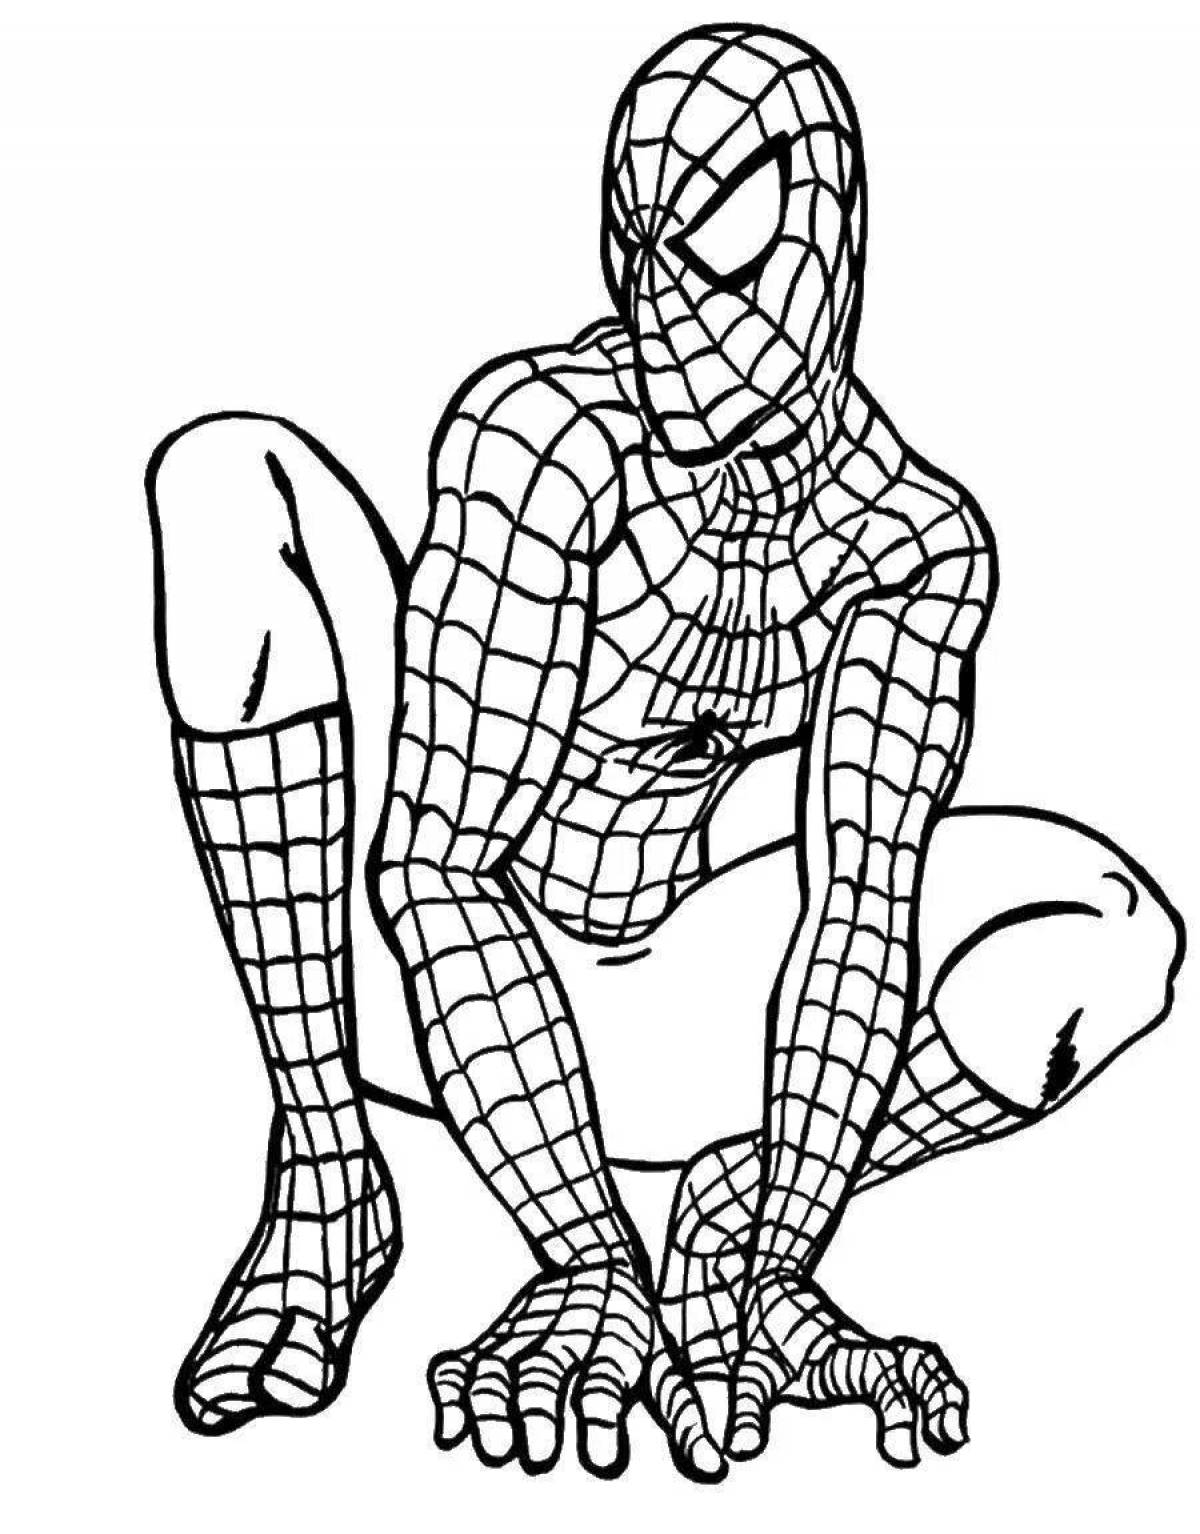 Attractive drawing of spider man